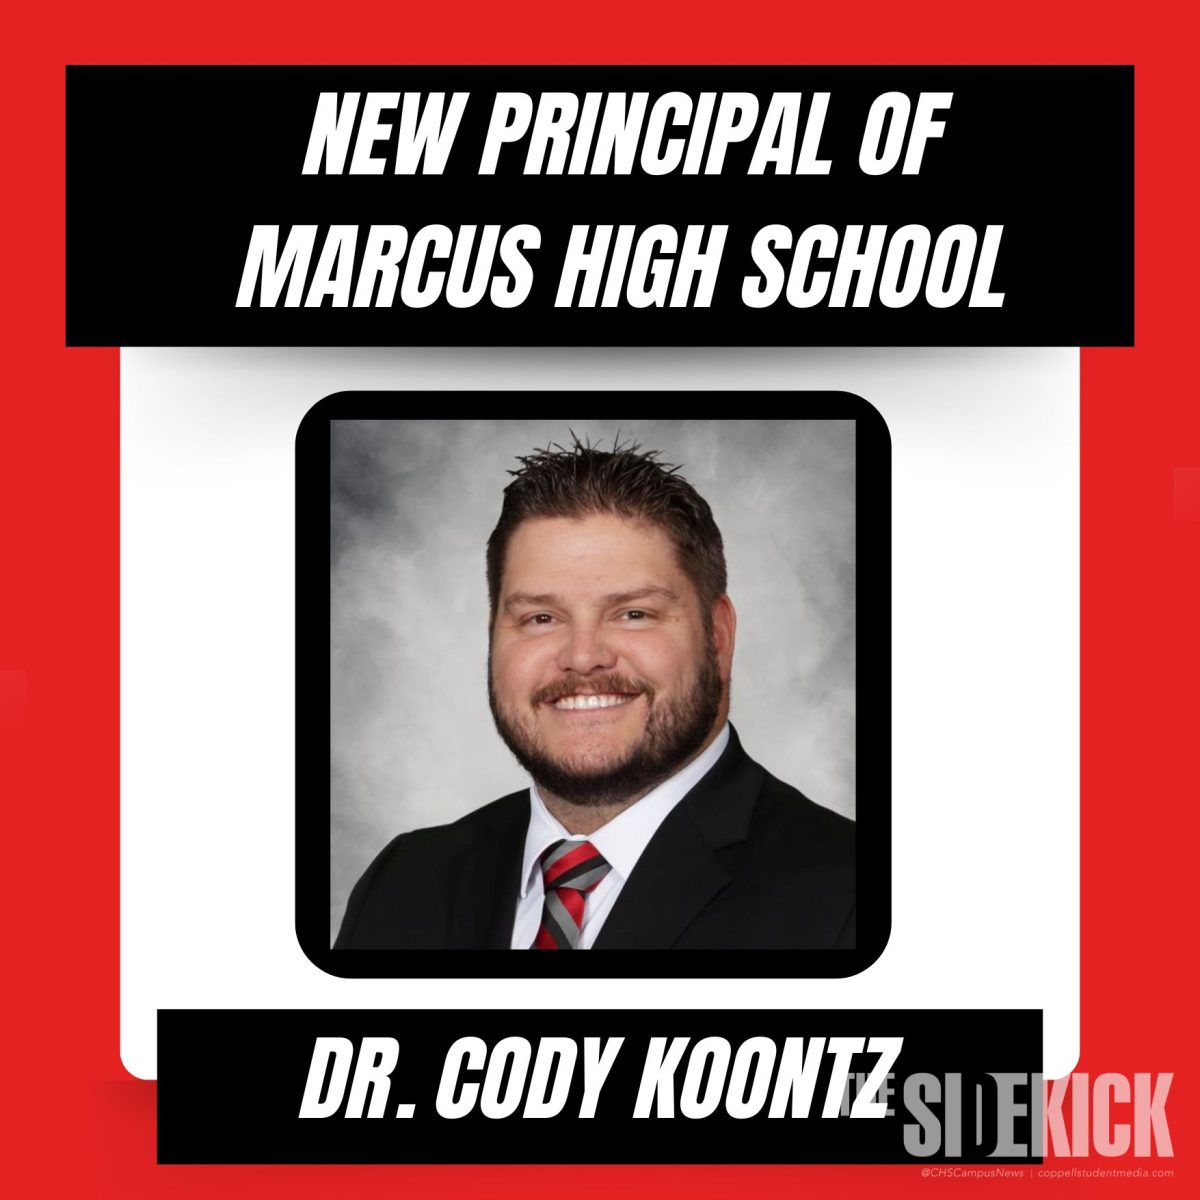 On+May+13%2C+CHS9+Principal+Dr.+Cody+Koontz+was+named+principal+of+Flower+Mound+Marcus+High+School.+Koontz+is+the+first+and+only+principal+of+CHS9.